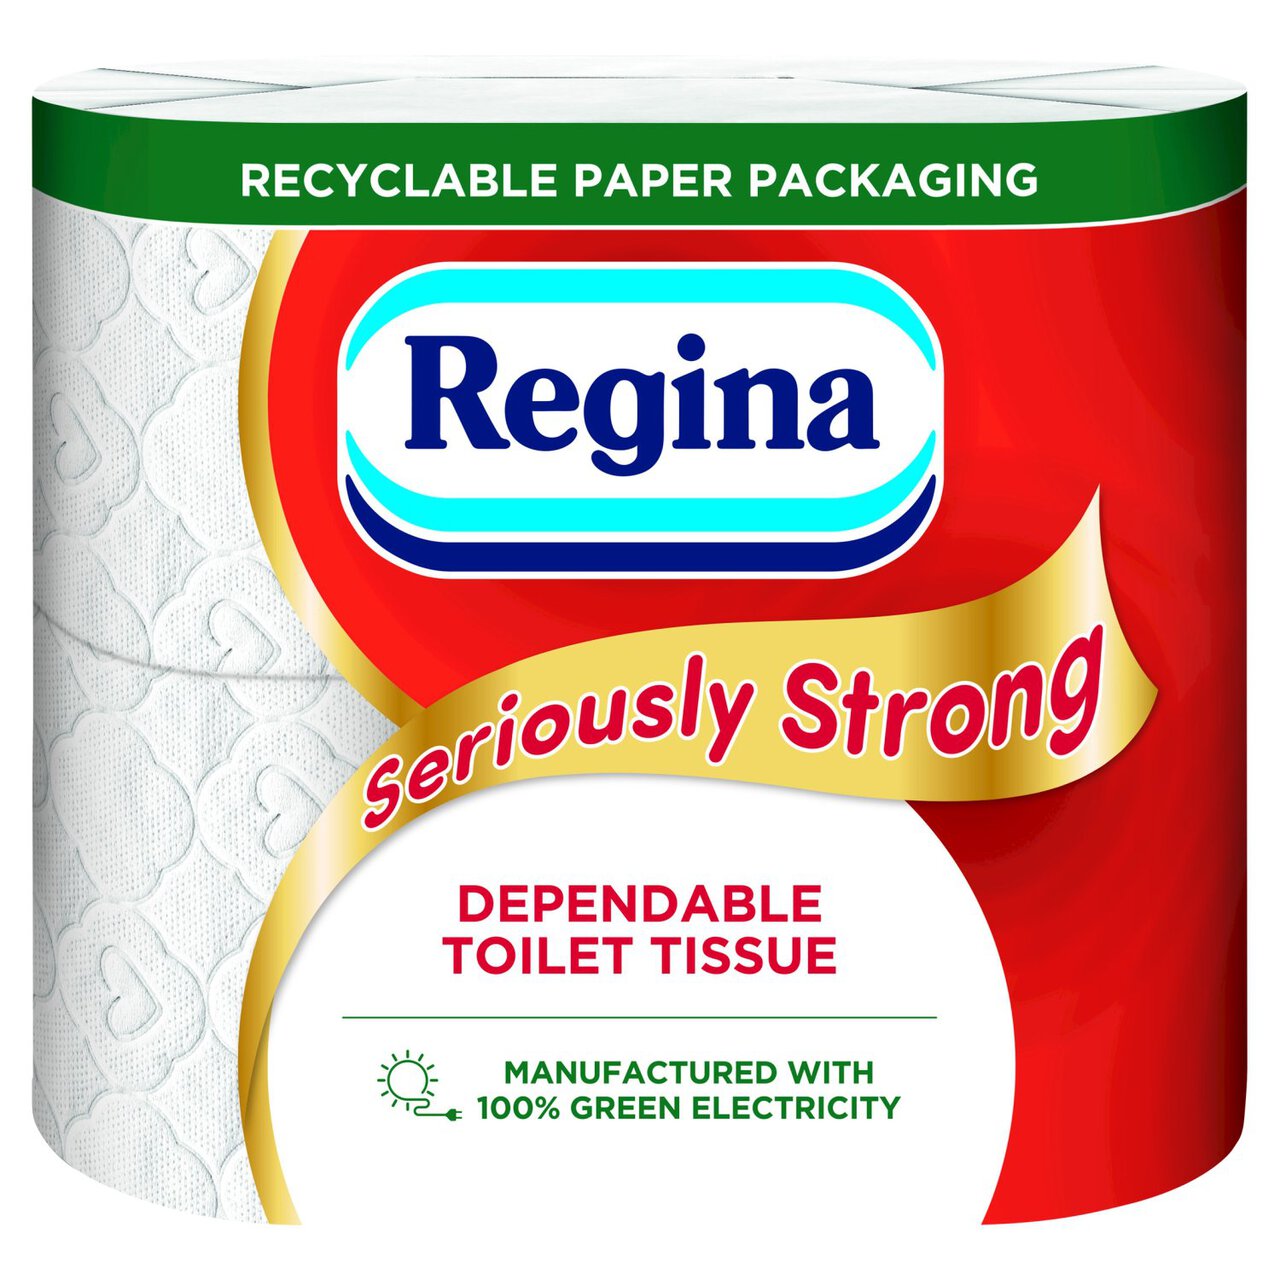 Regina Seriously Strong Toilet Tissue 4 per pack